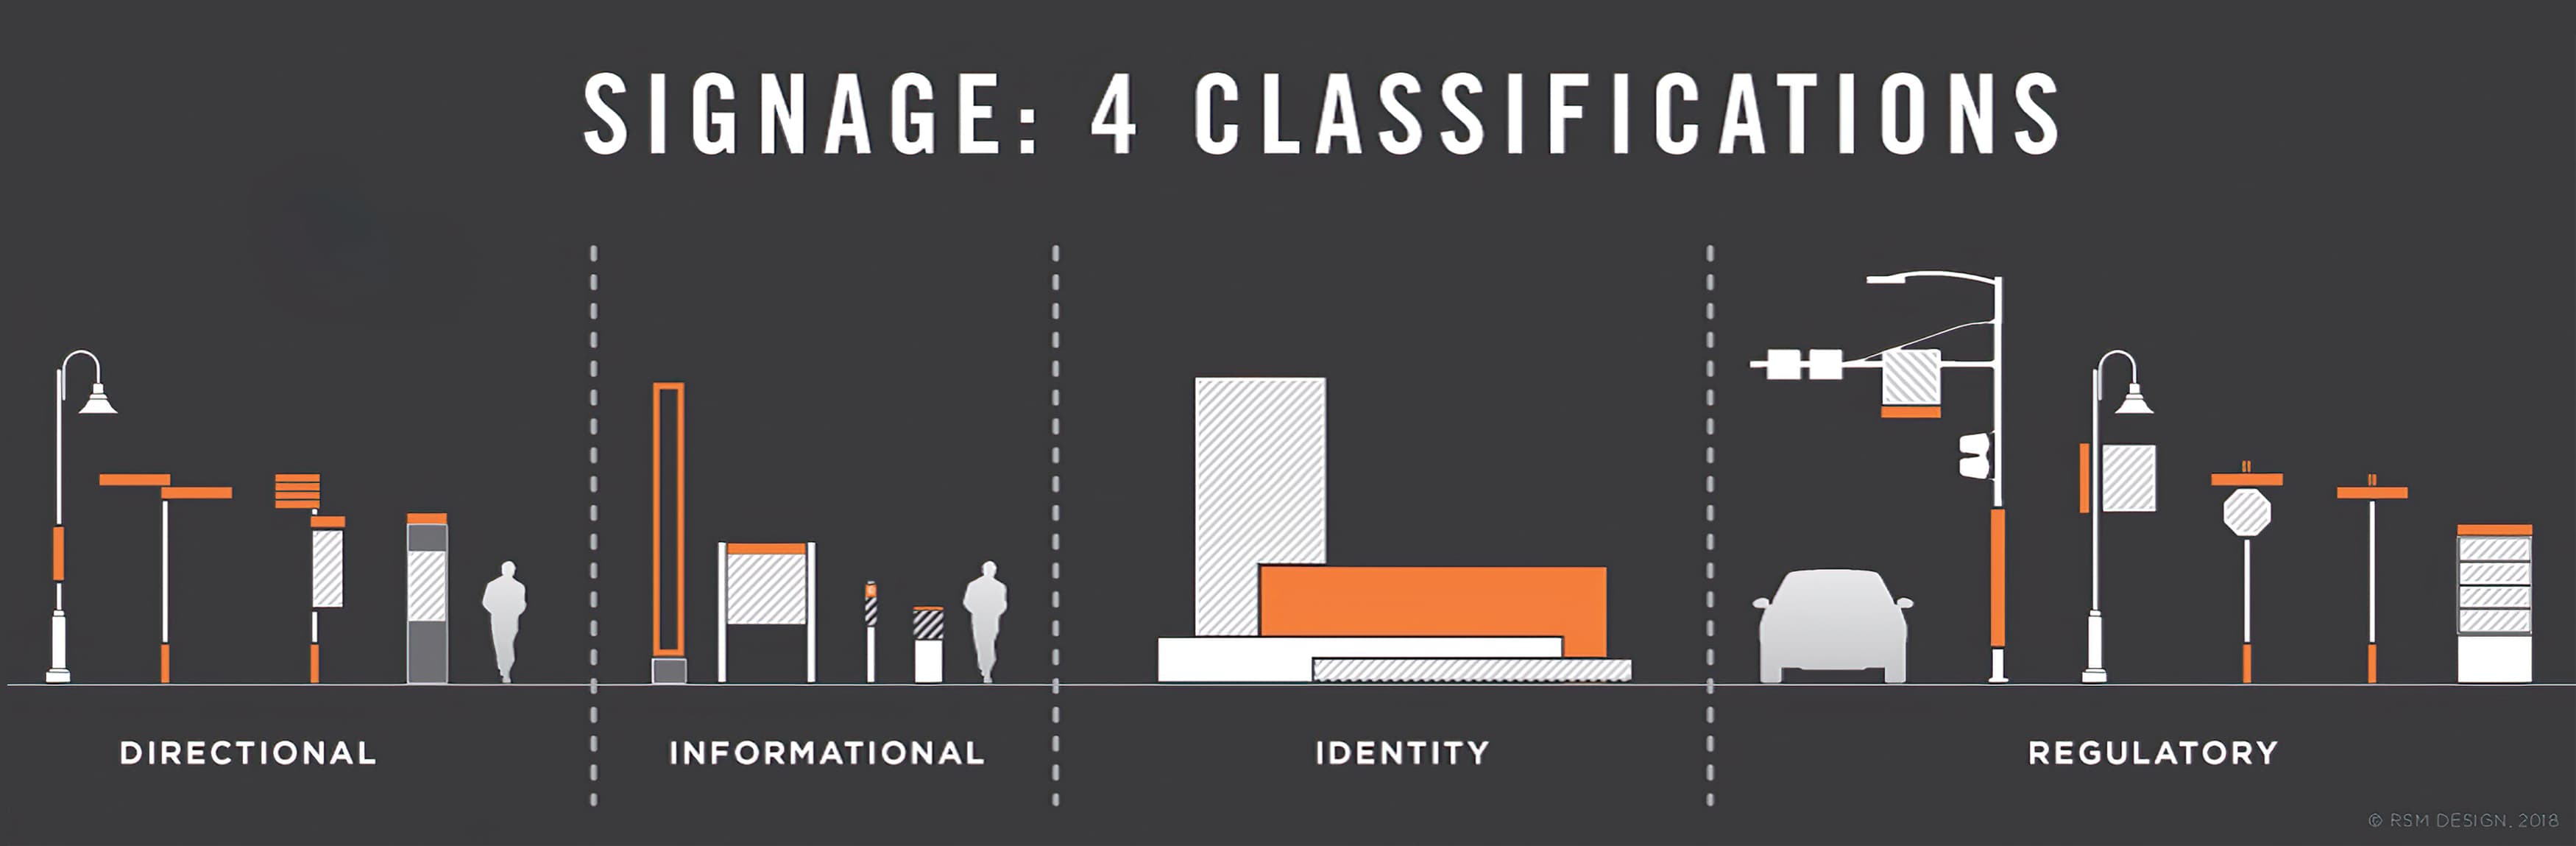 An infographic showing examples of the 4 classifications of signage that help us define wayfinding: directional signage, informational signage, identity signage, and regulatory signage